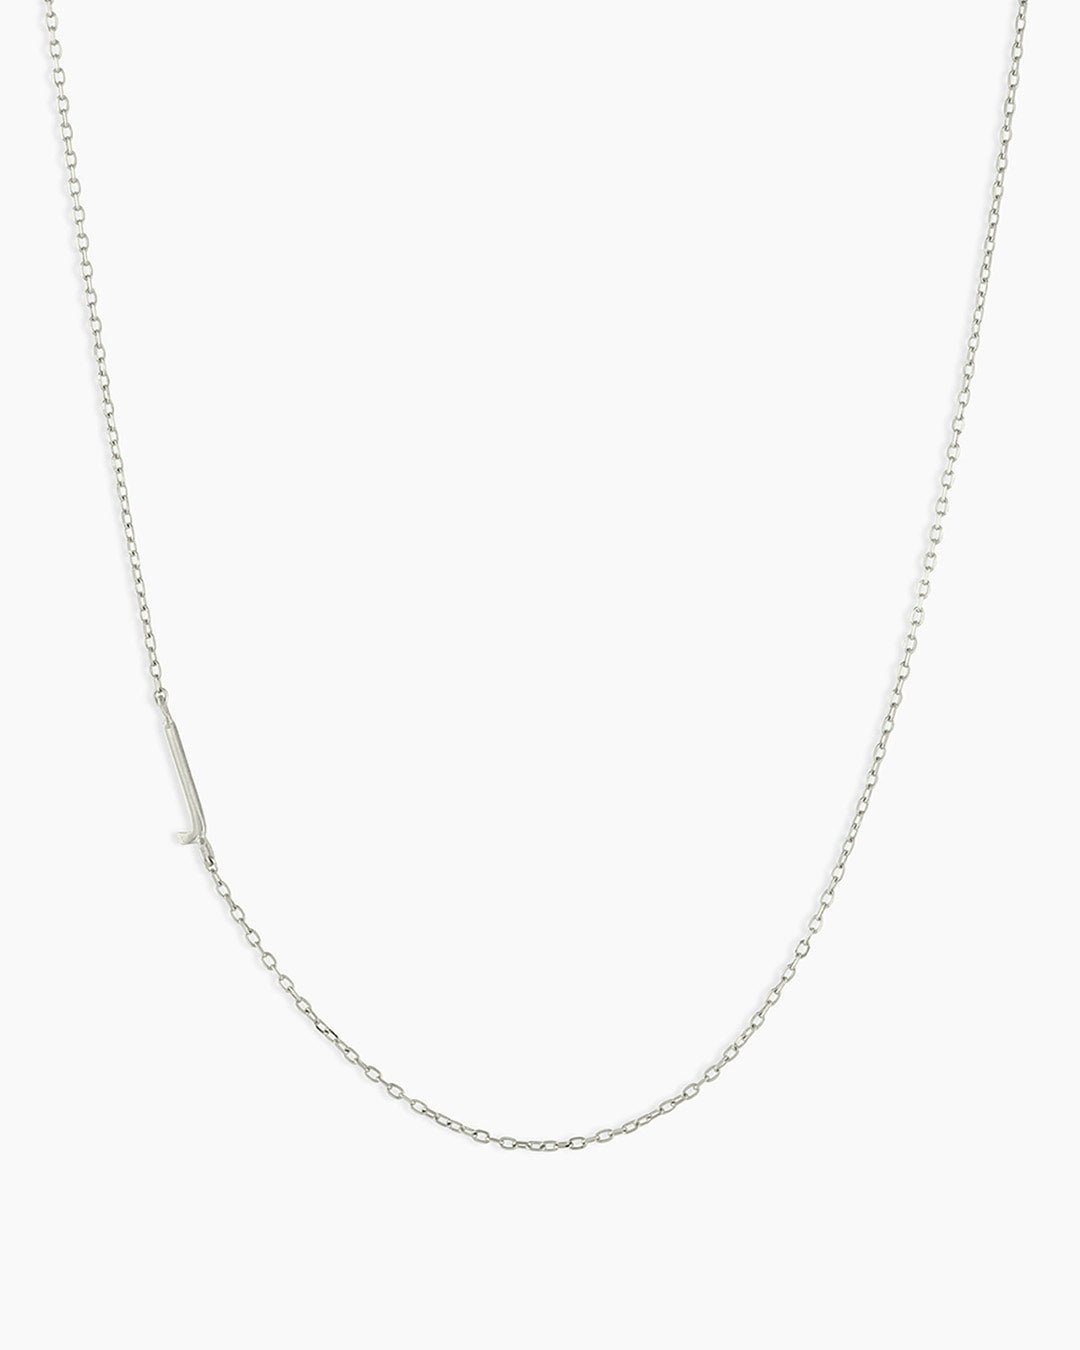 Woman wearing Alphabet Necklace || option::14k Solid White Gold, J